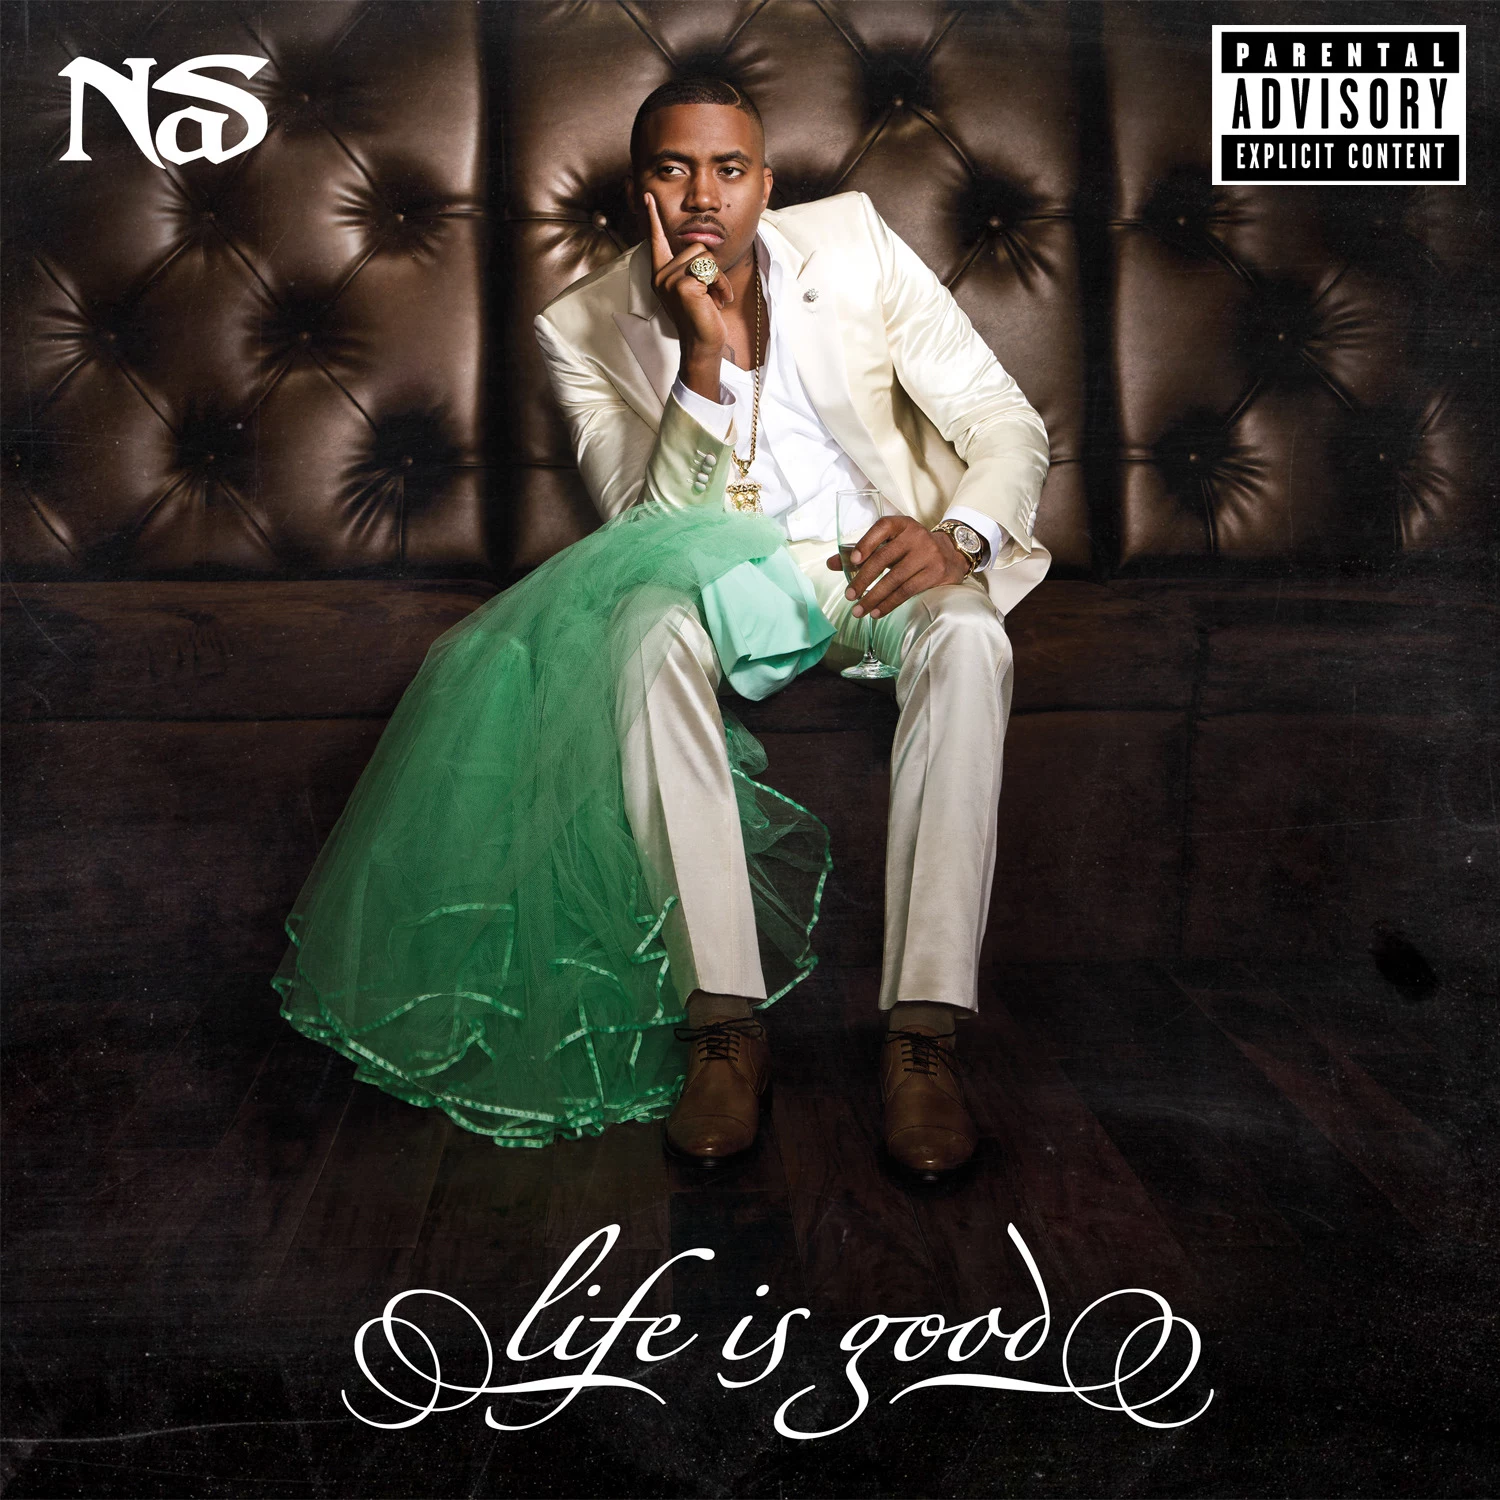 https://townsquare.media/site/812/files/2019/10/nas-life-is-good.jpg